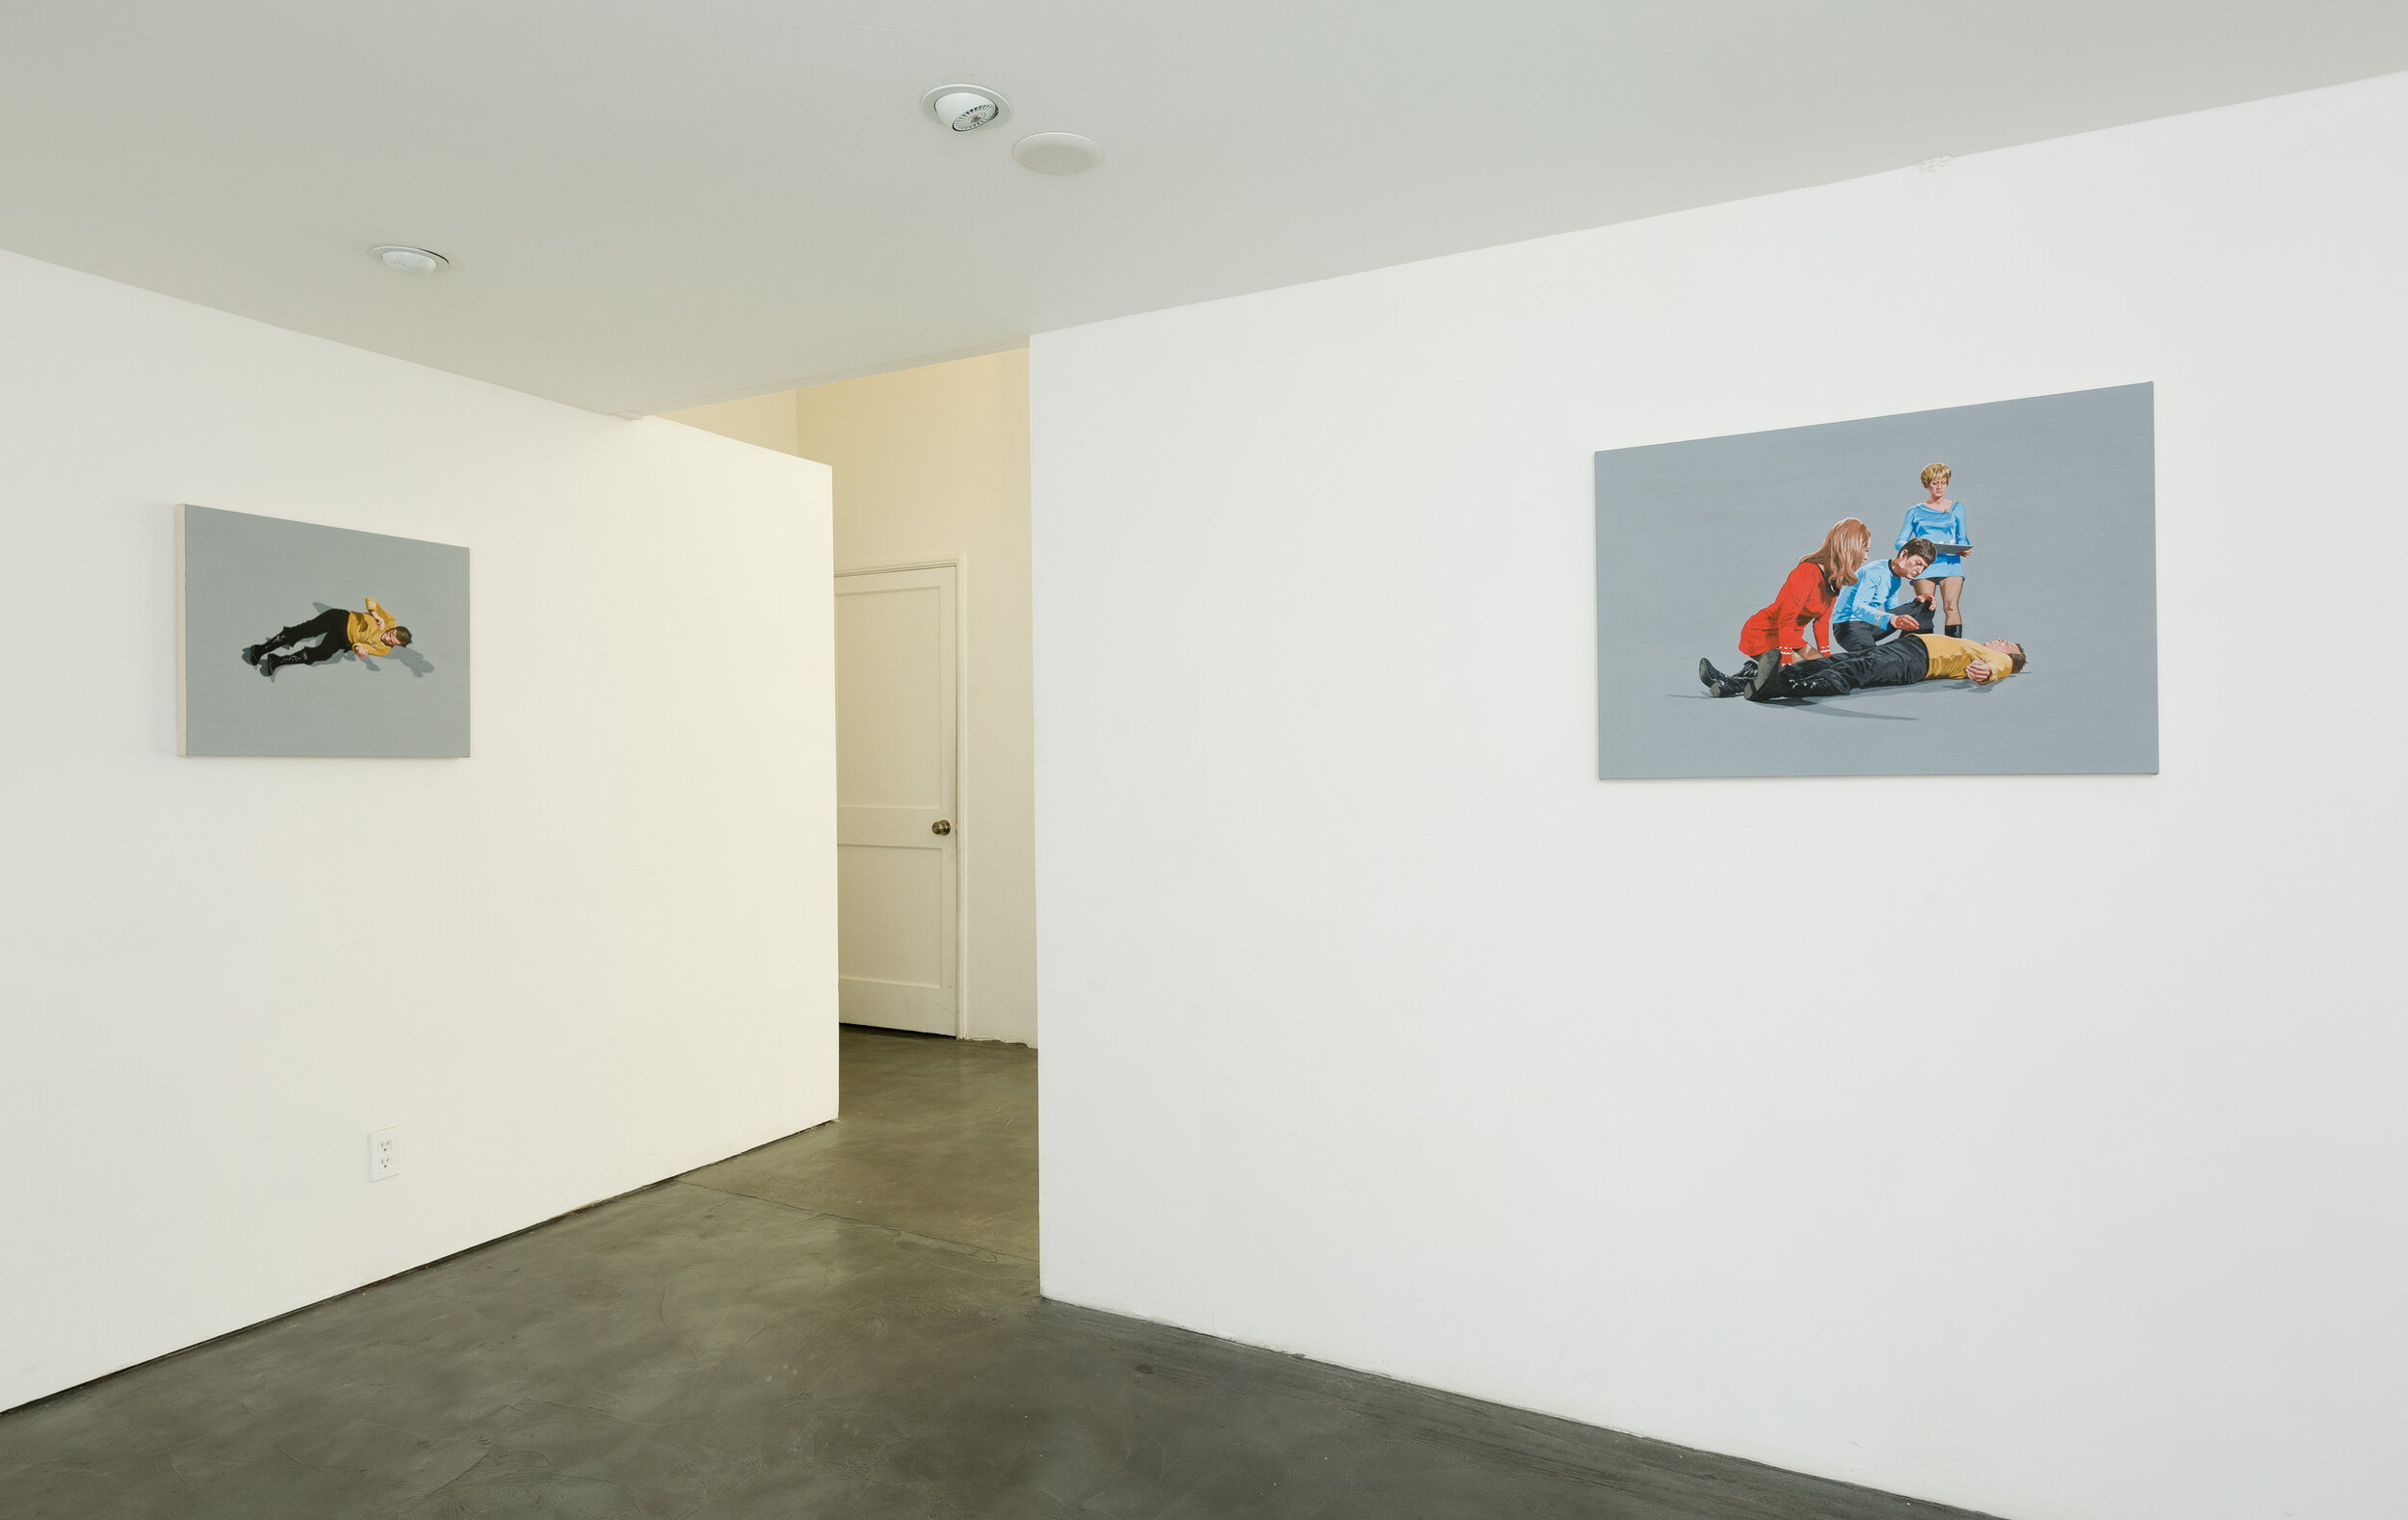  Luke Butler,  In Color and Black and White , In installation at CJG, May 2014 